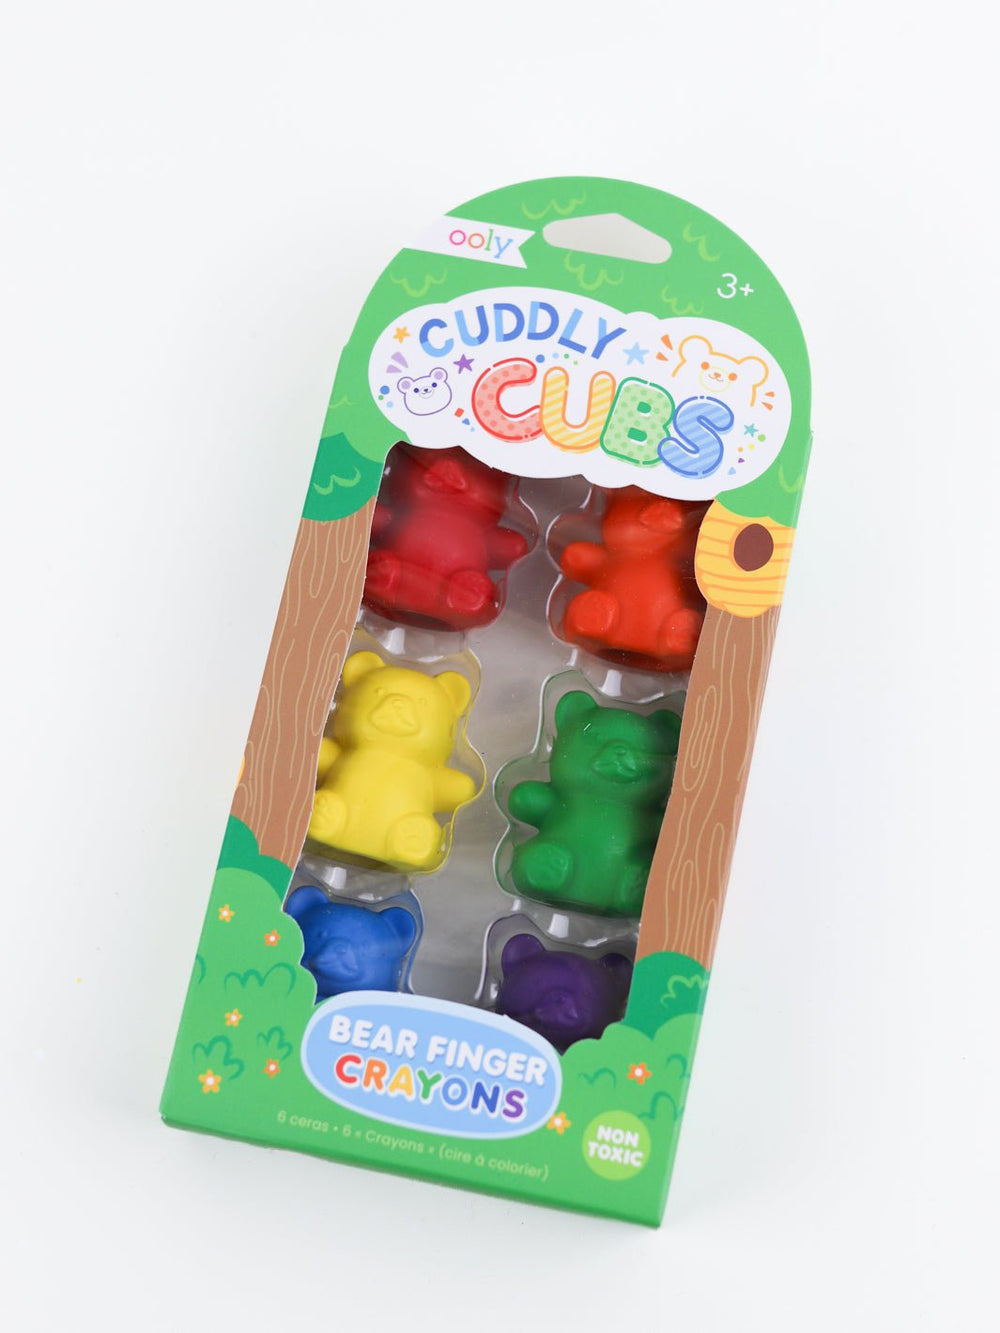 Cuddly Cubs Finger Crayons - Heyday